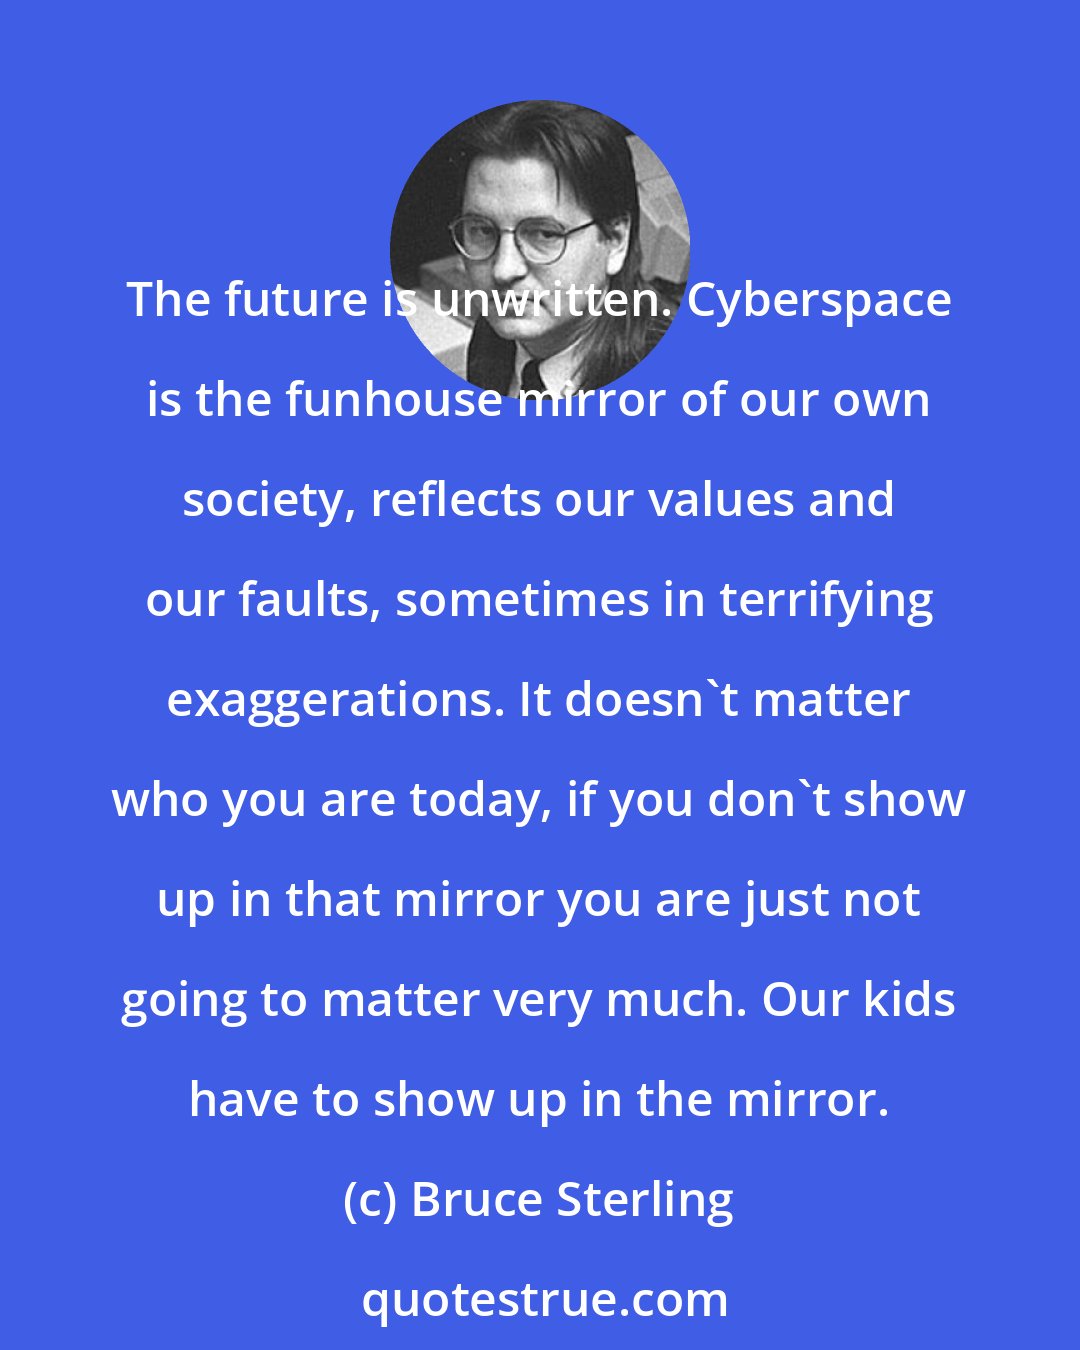 Bruce Sterling: The future is unwritten. Cyberspace is the funhouse mirror of our own society, reflects our values and our faults, sometimes in terrifying exaggerations. It doesn't matter who you are today, if you don't show up in that mirror you are just not going to matter very much. Our kids have to show up in the mirror.